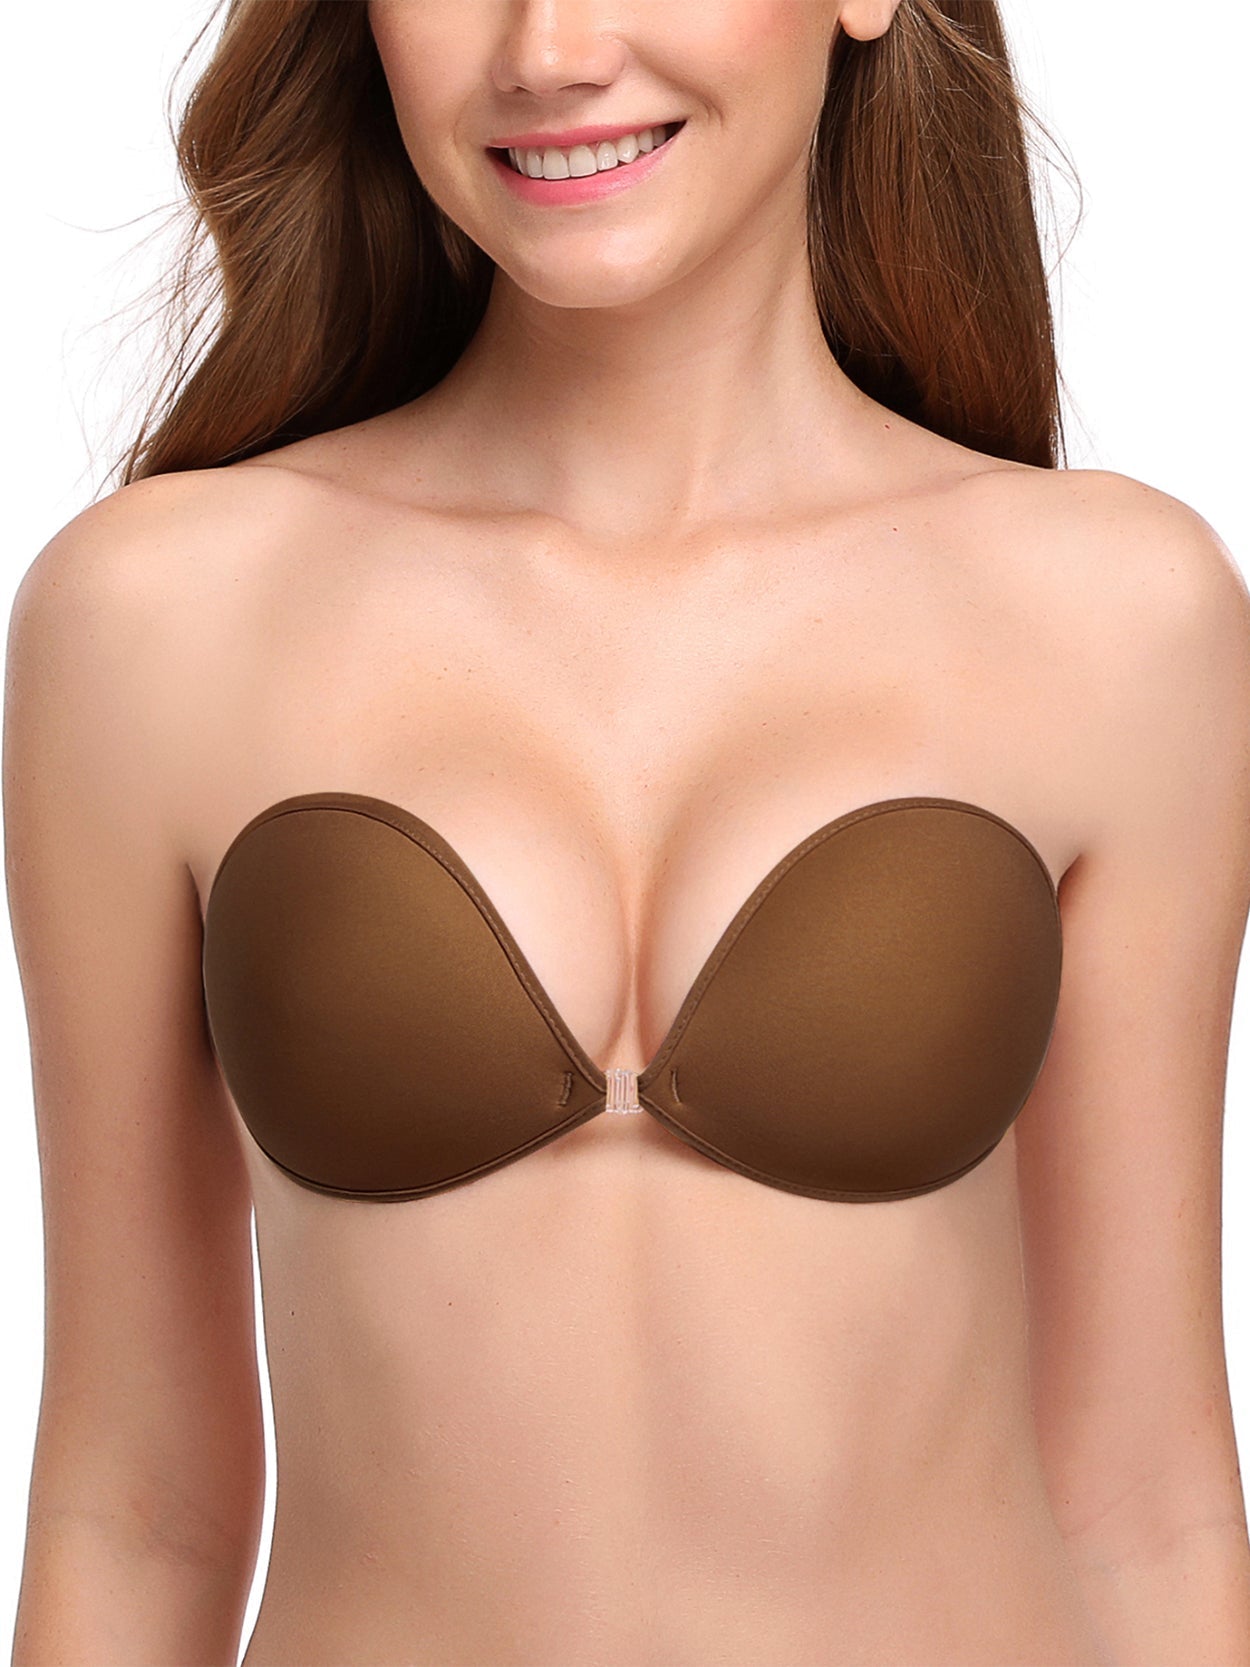 Silicone Invisible Bra Self Adhesive Reusable Push-up, Cup B, Beige-Clear  Straps